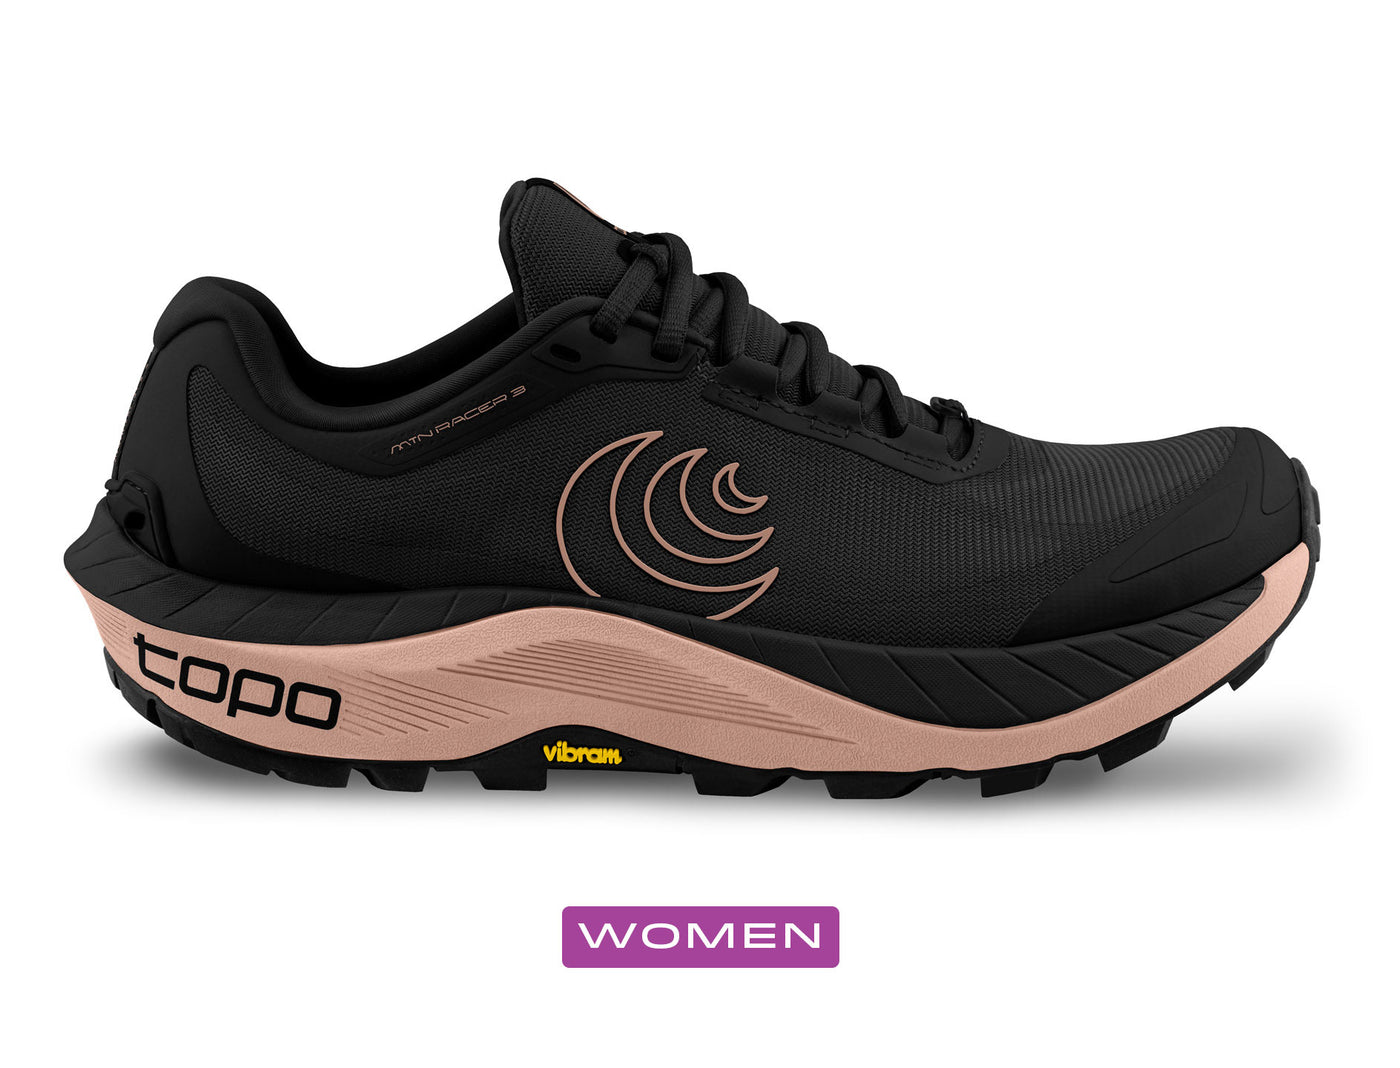 Black and mauve Mtn Racer 3 side view. Trail running shoe is black and midsole is mauve